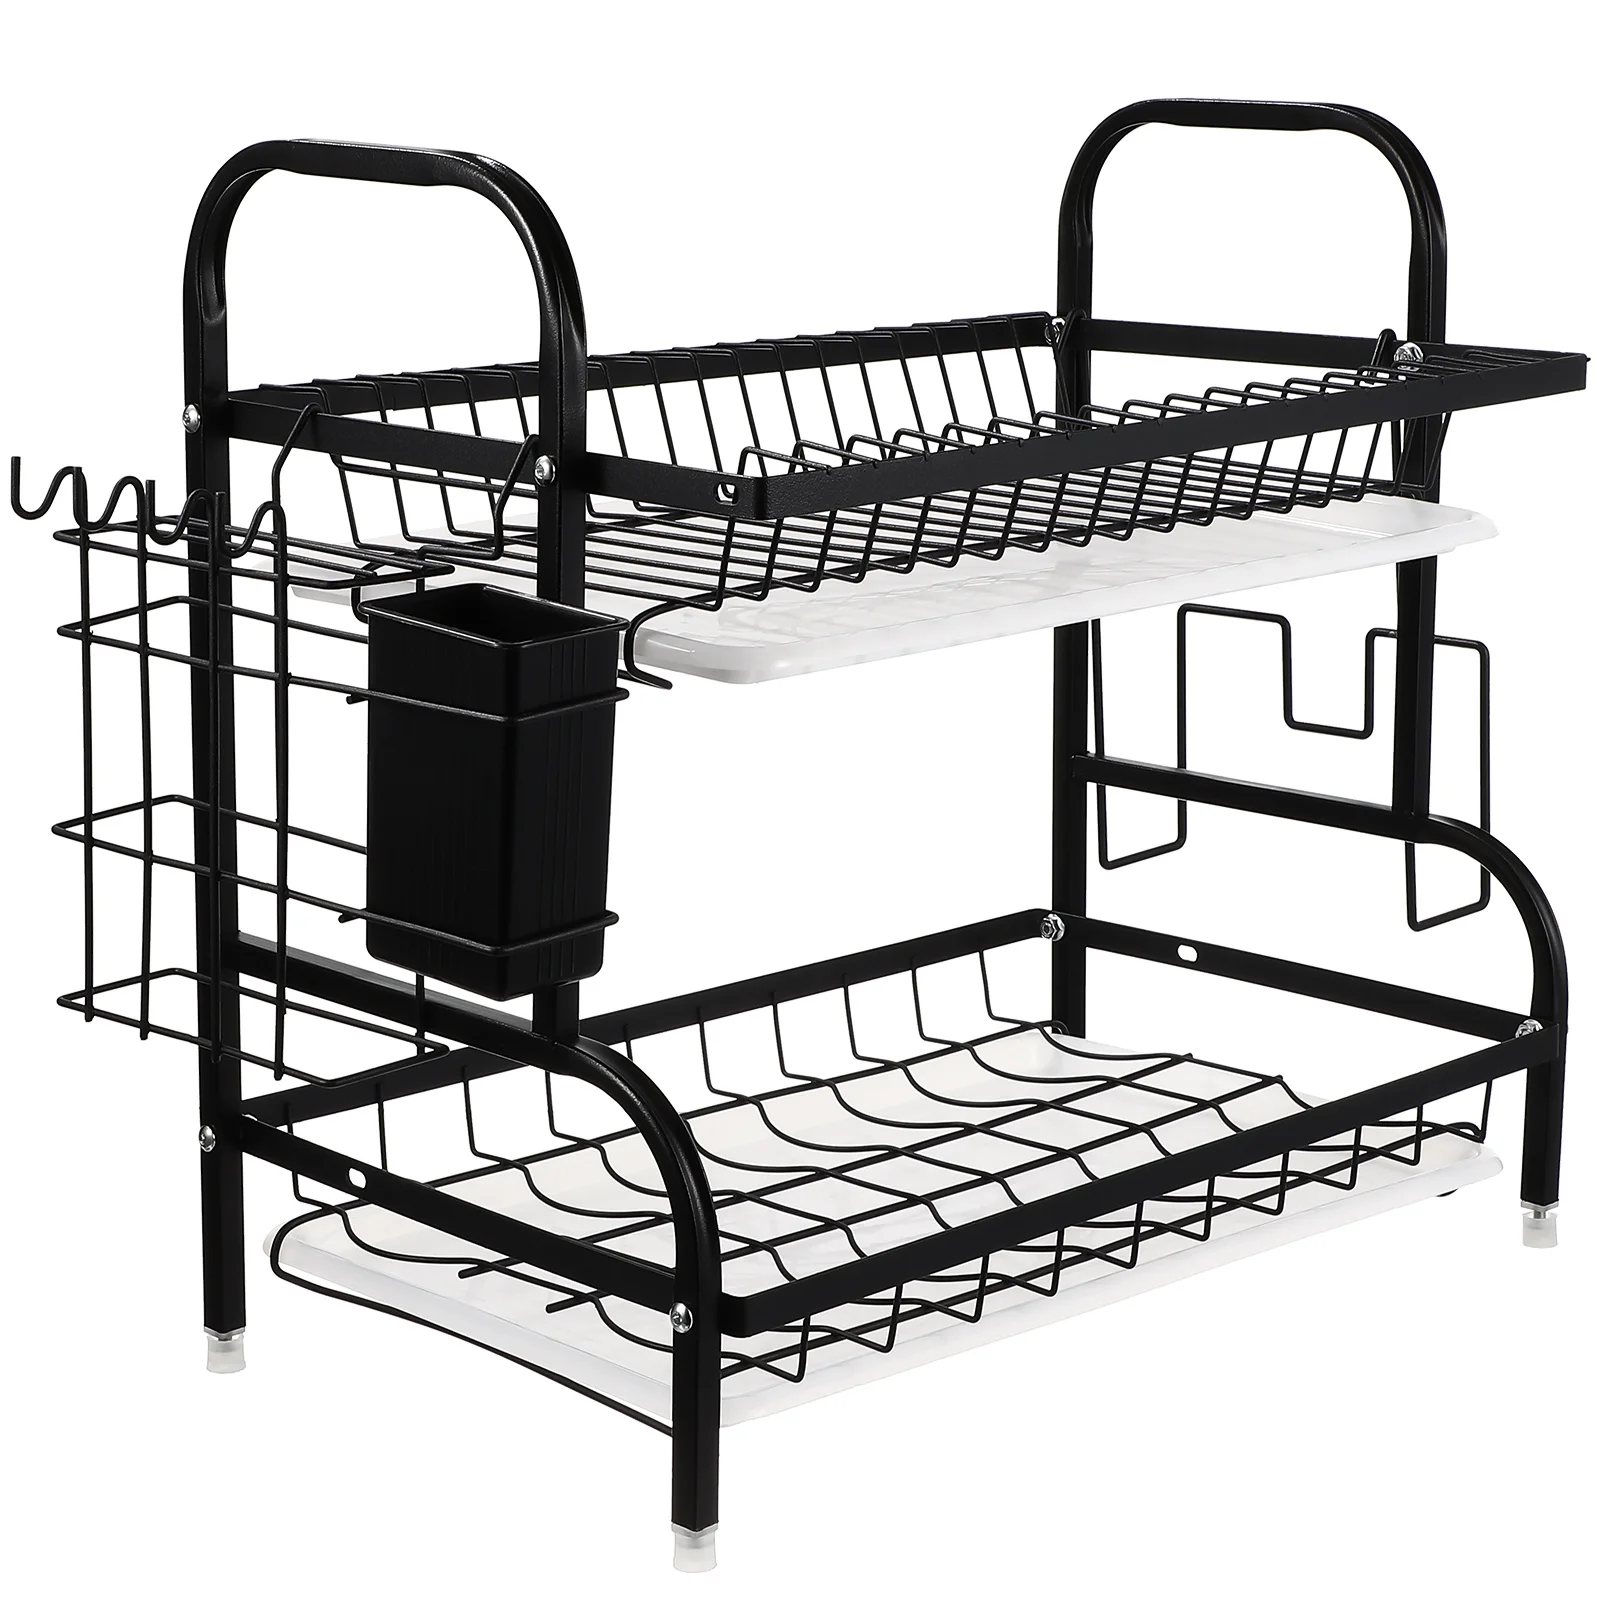 

Drainer Rack Draining Bowl Storage Counter Stand Dish Plate Racks Saucer Holder Multi-functional Kitchen sink Drying